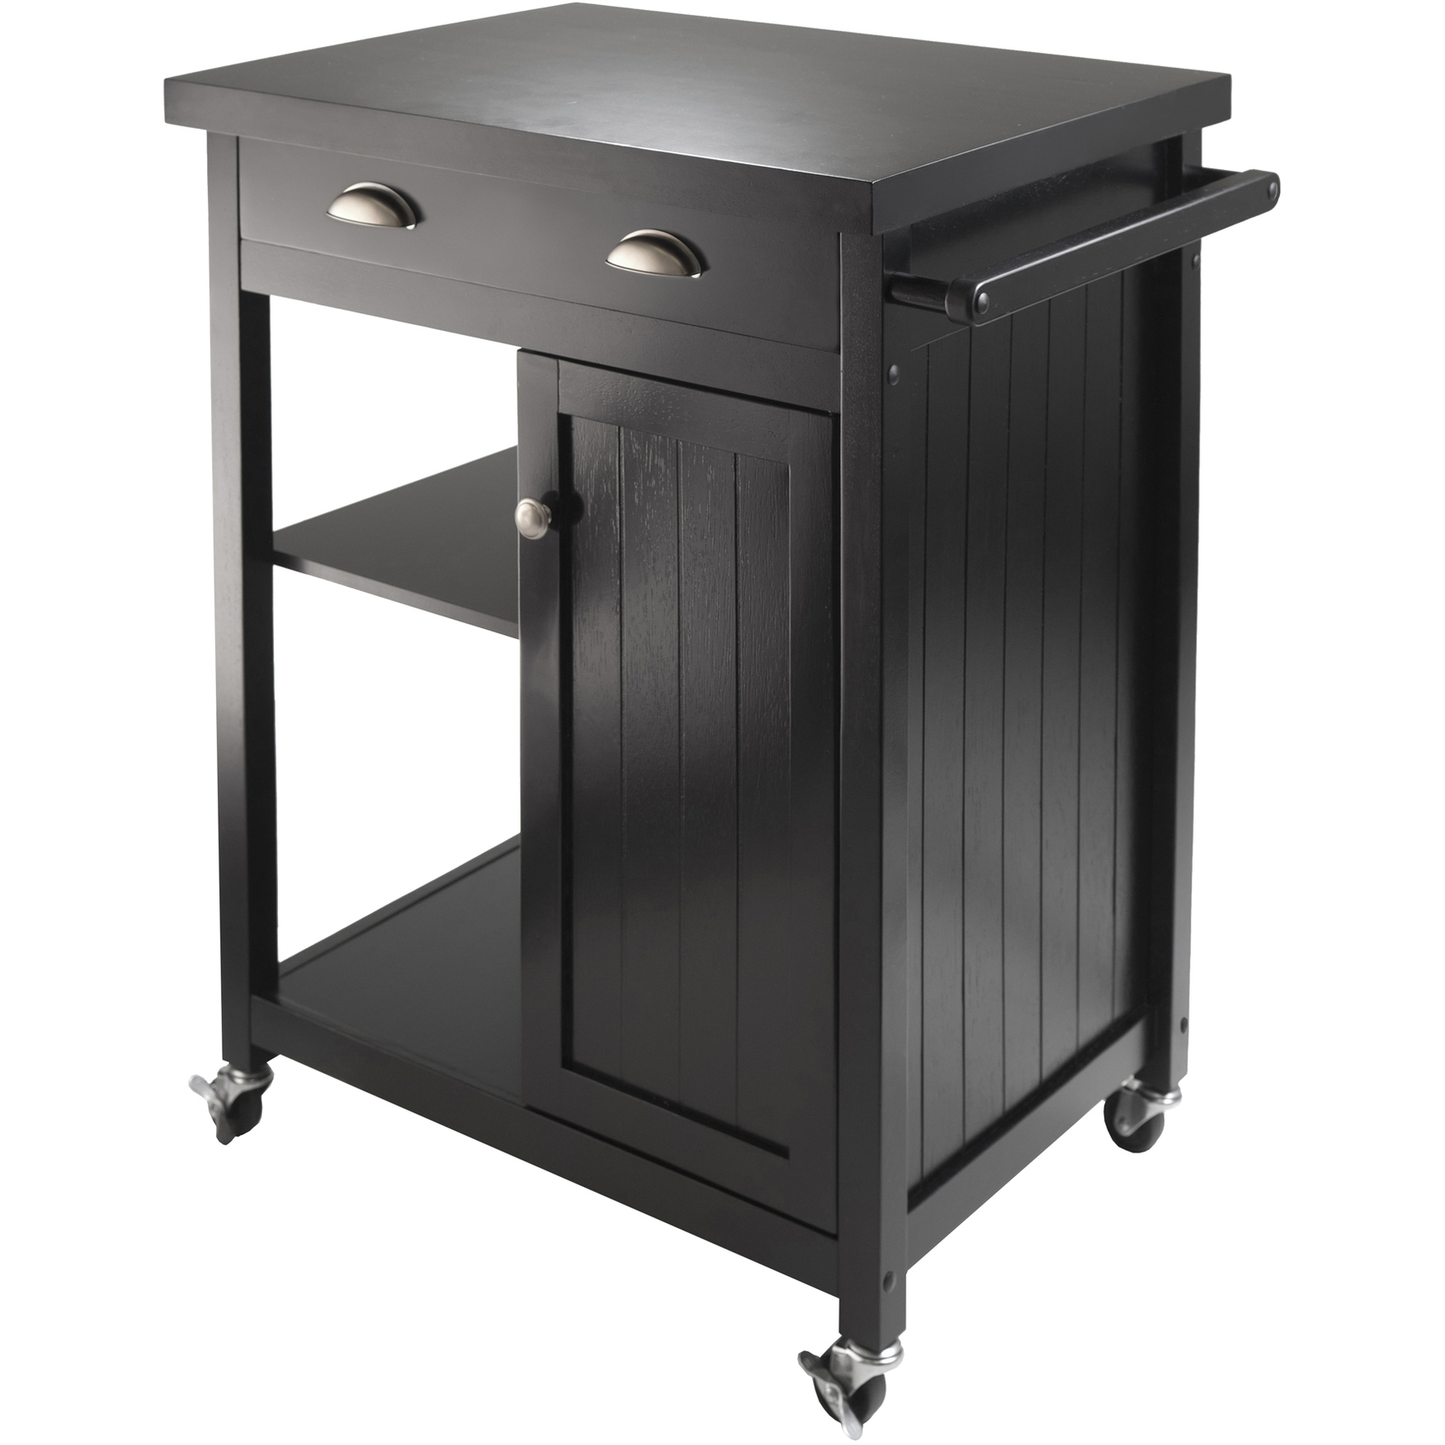 Winsome Timber Kitchen Cart with Wheels and Wainscot Panel - Black -  - 1